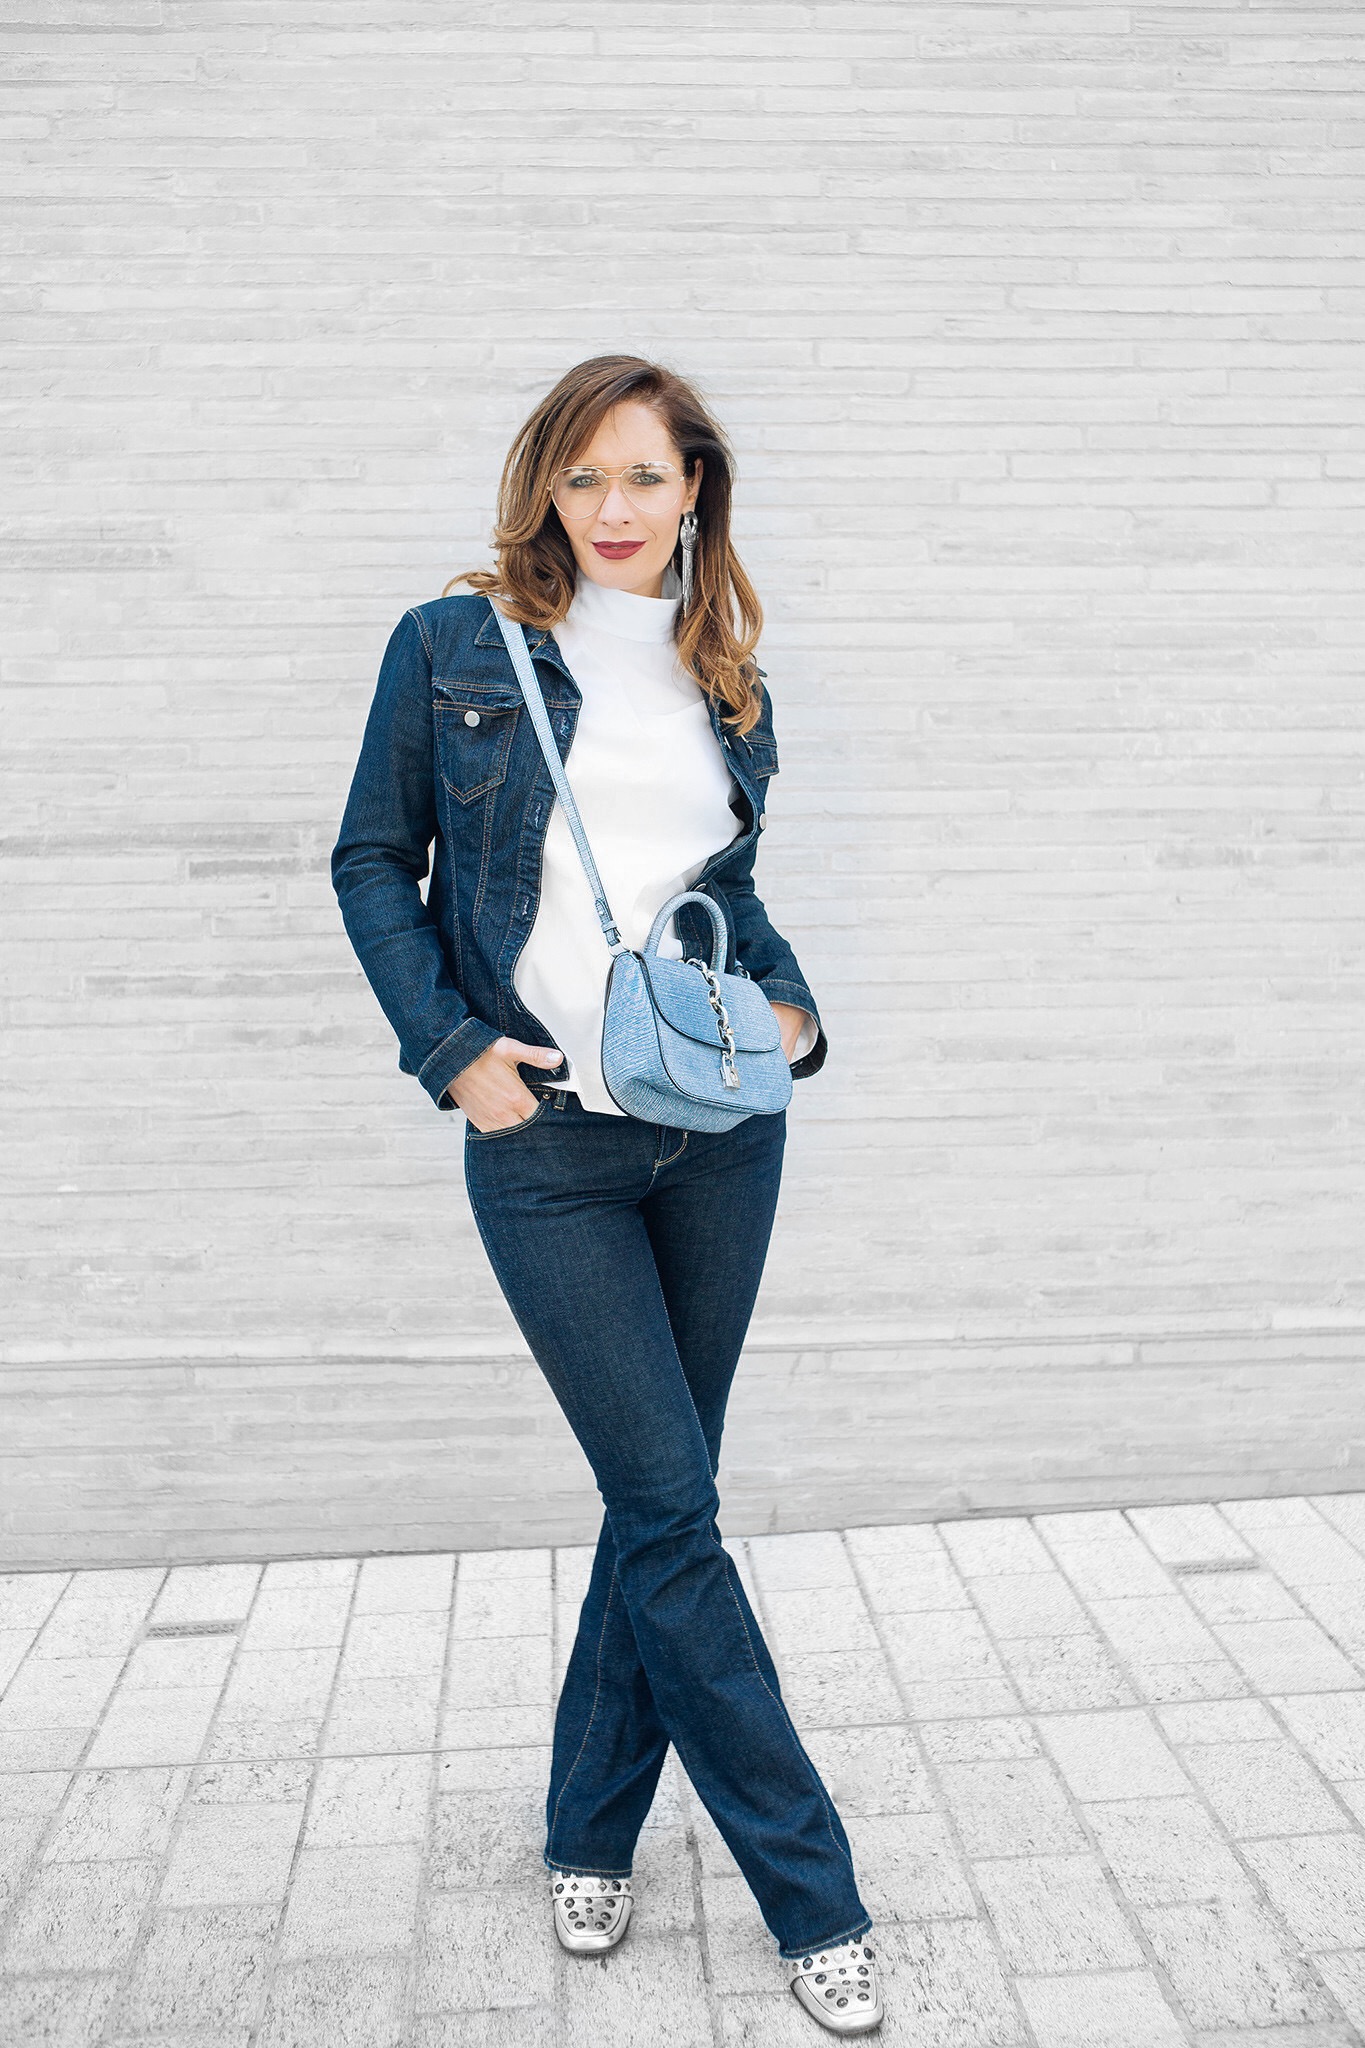 Petra from Chic Journal wears double denim and Louis Vuitton bag